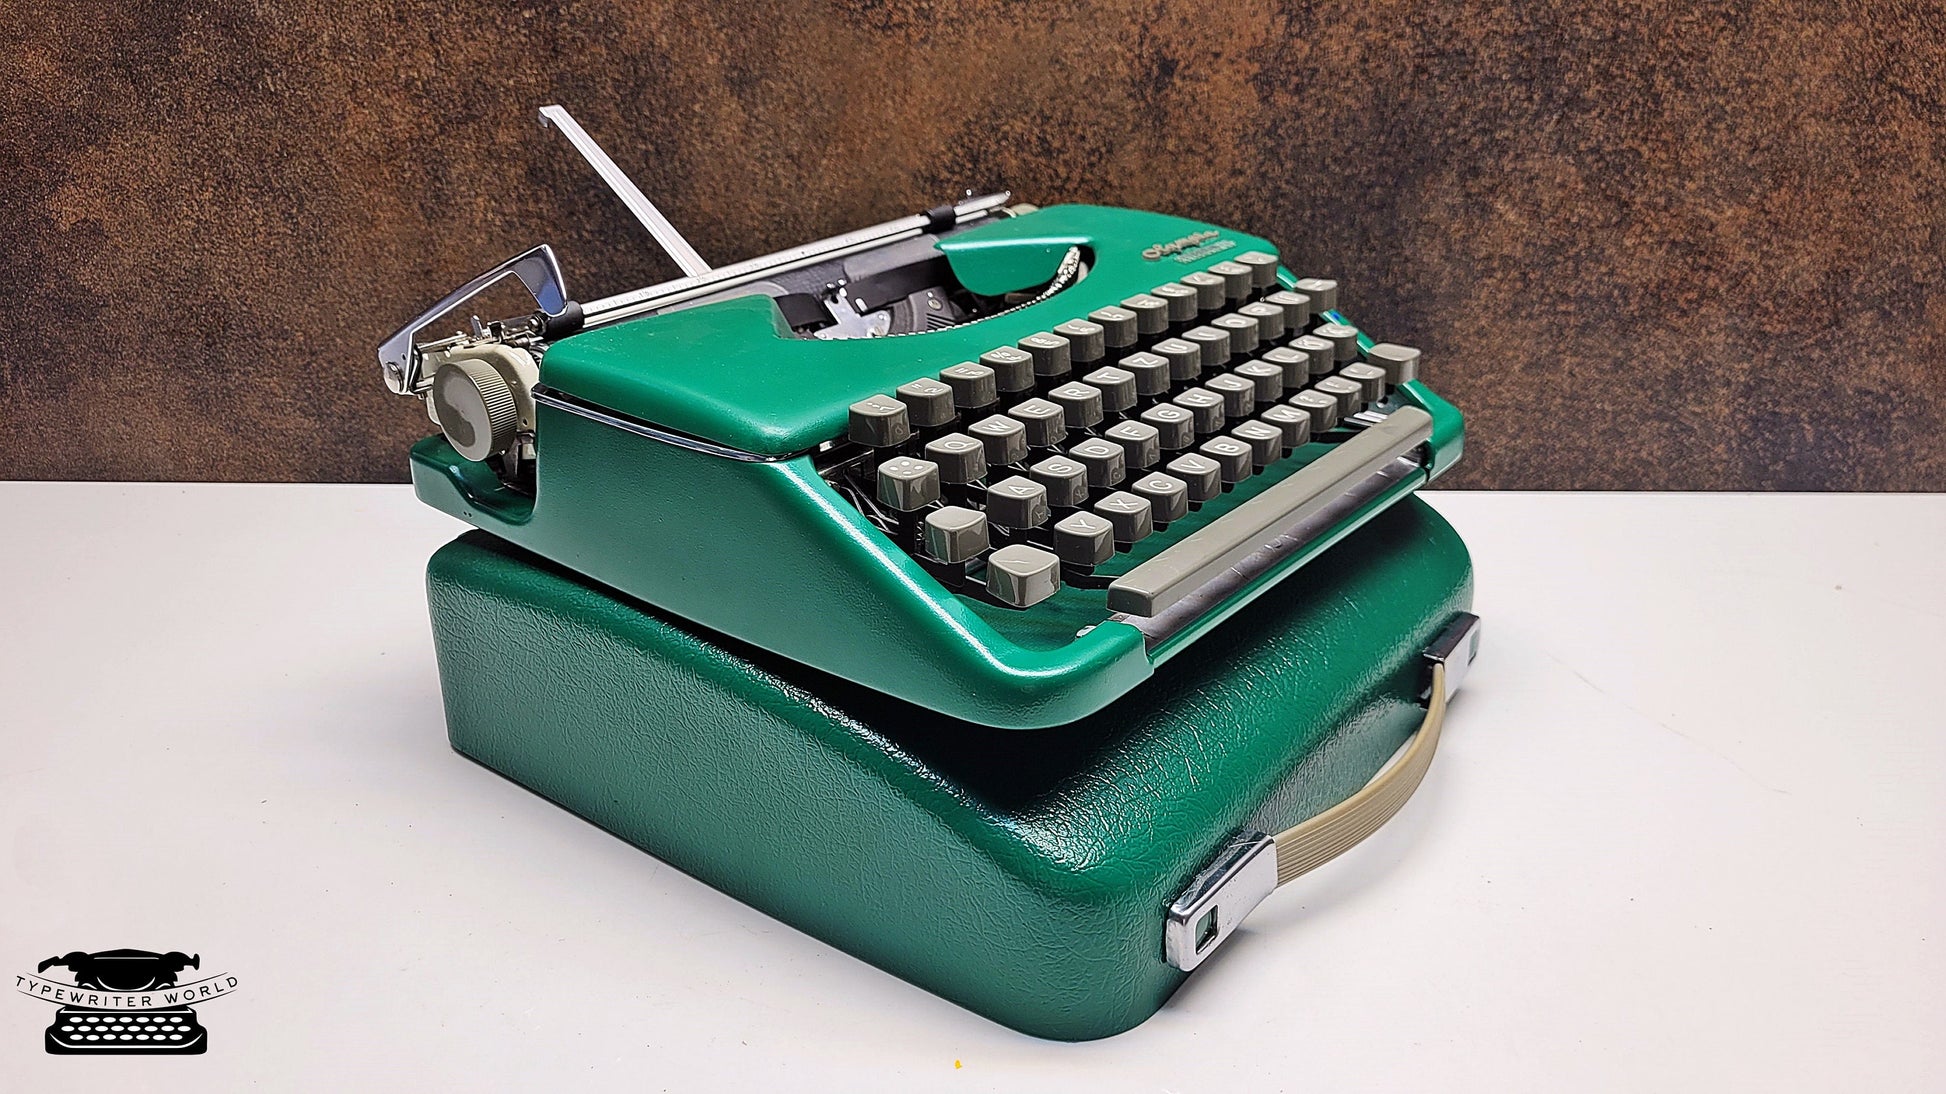 Vintage Olympia Splendid 33/66 Matte Green Typewriter - The Perfect Gift for Writers, Collectors, and Office Enthusiasts